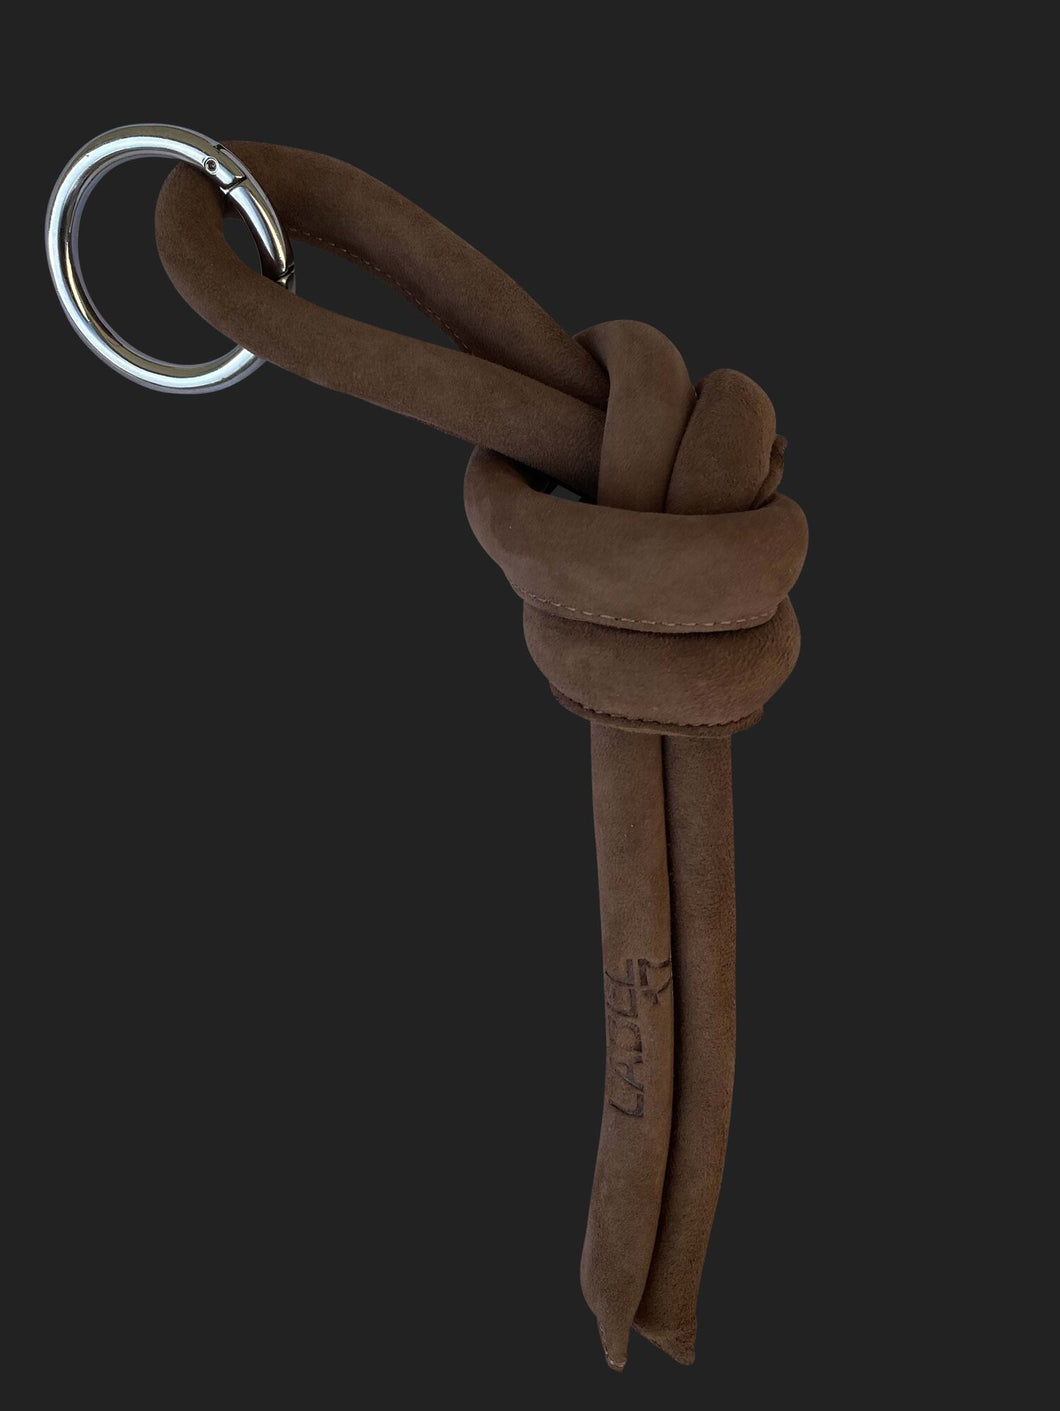 Tabacco suede knot keyring